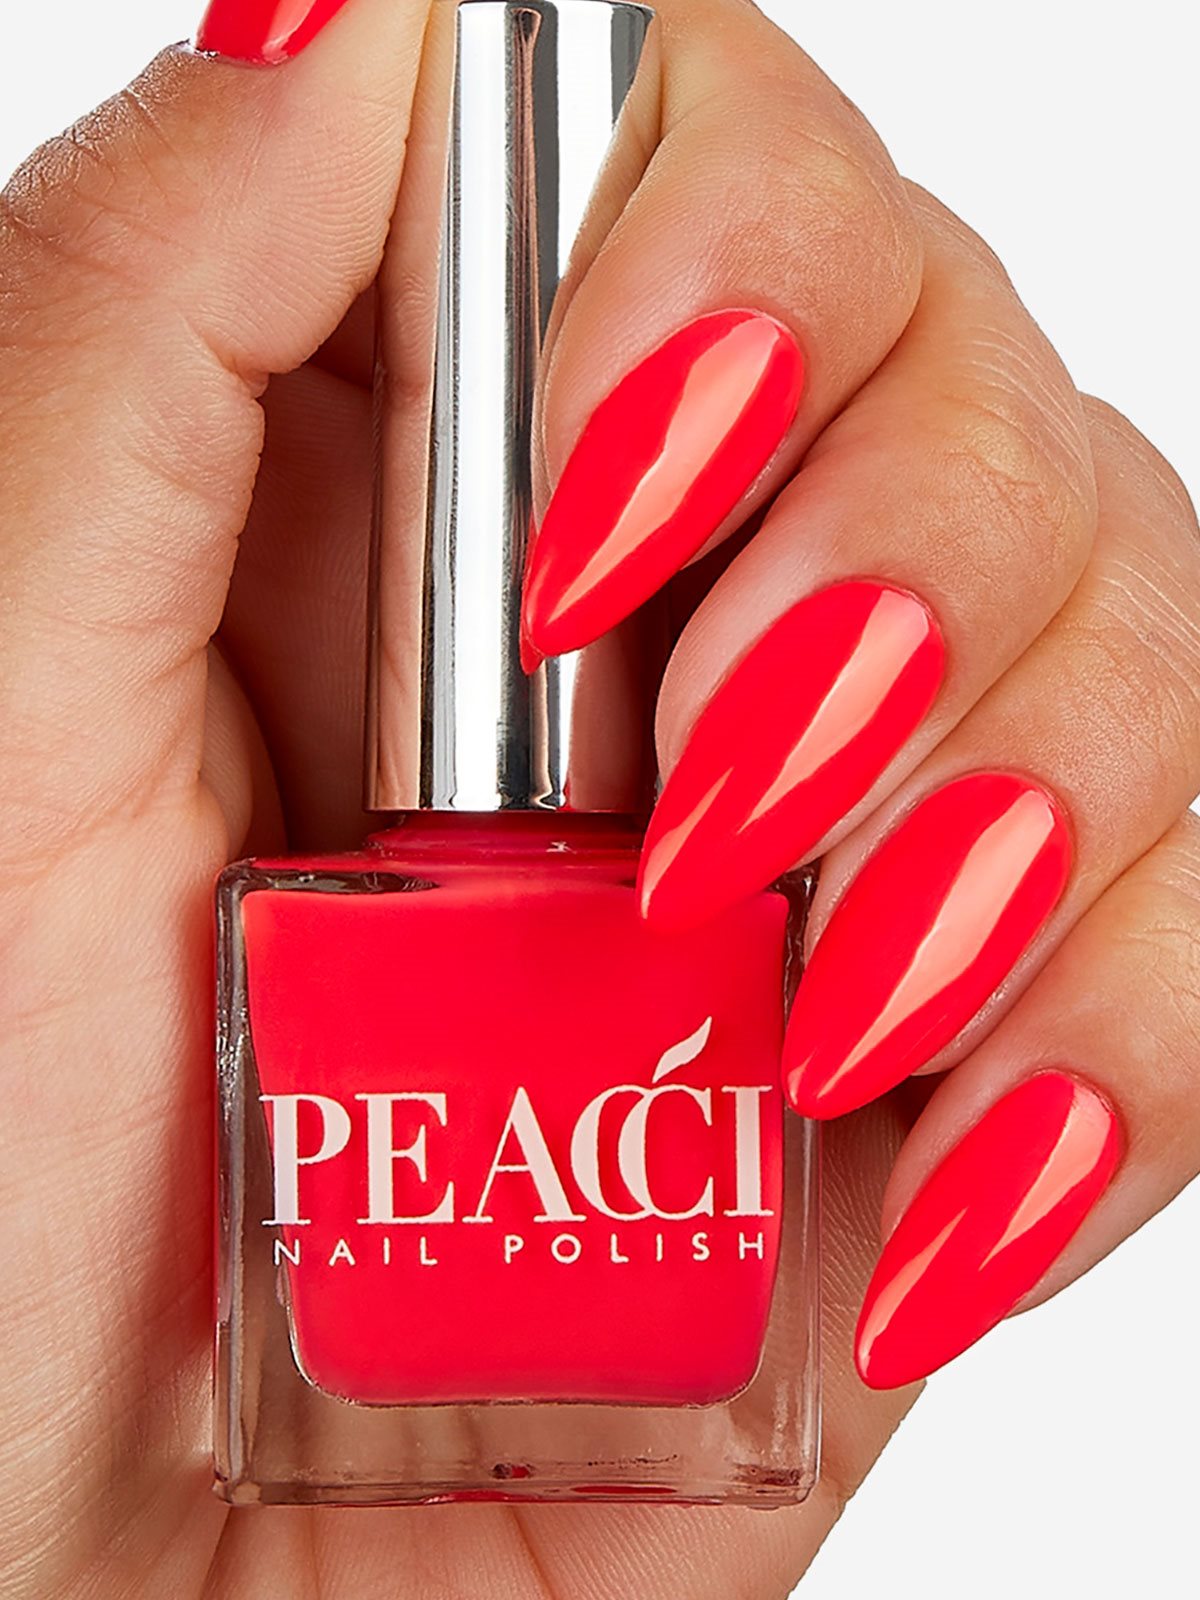 hed Diverse varer by Bae Watch Nail Polish - Peacci